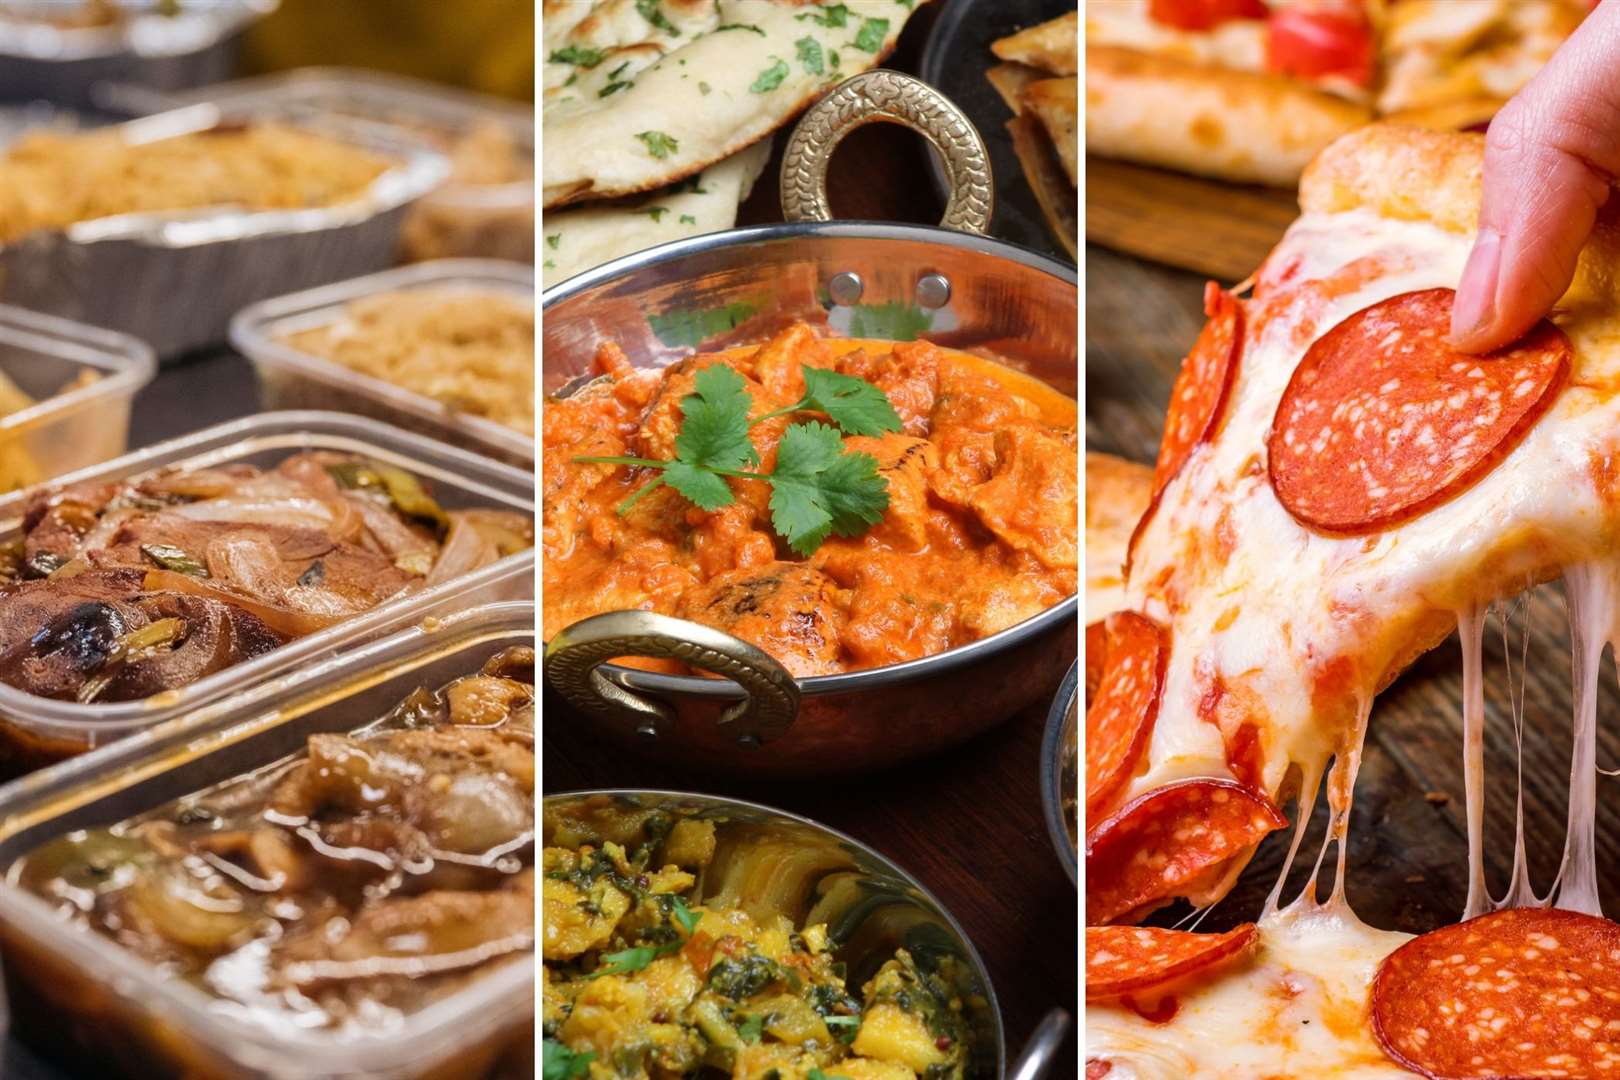 Chinese, Indian and pizza deliveries will all be available to order in the same delivery. Pictures: iStock